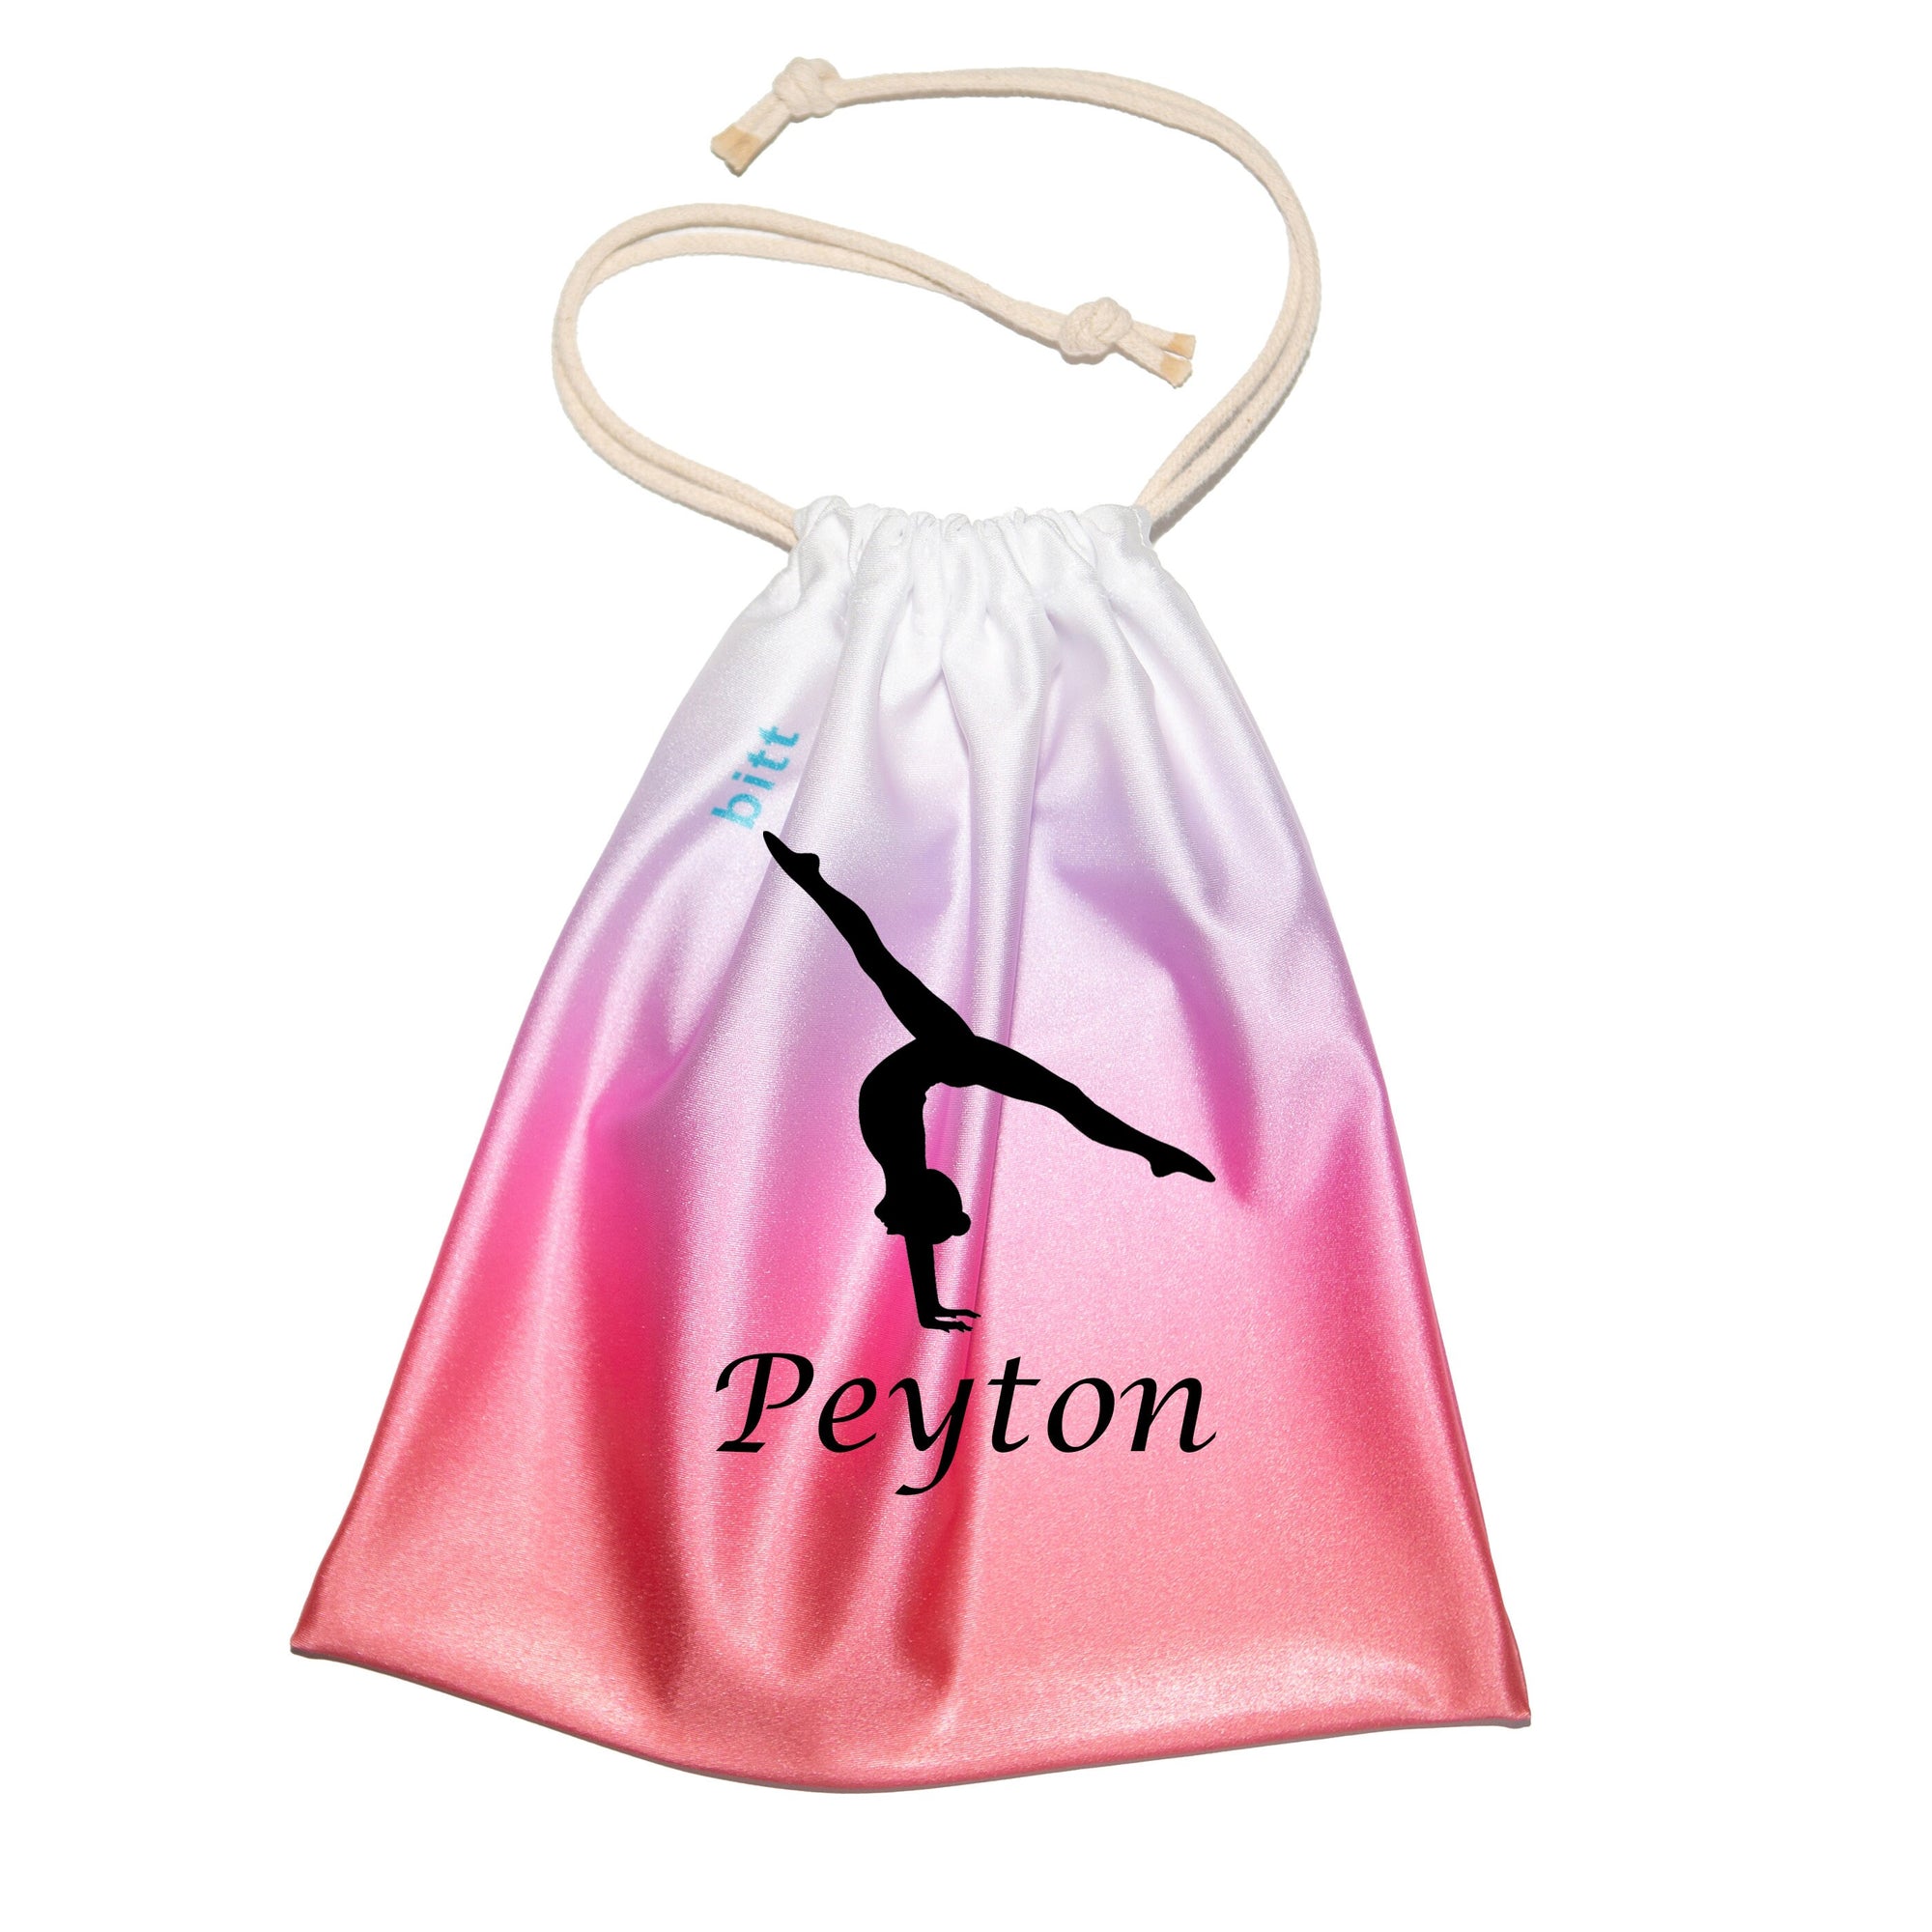 Personlized Gymnastics Grip Bag with Split Handstand in Coral, Purple, White Ombre